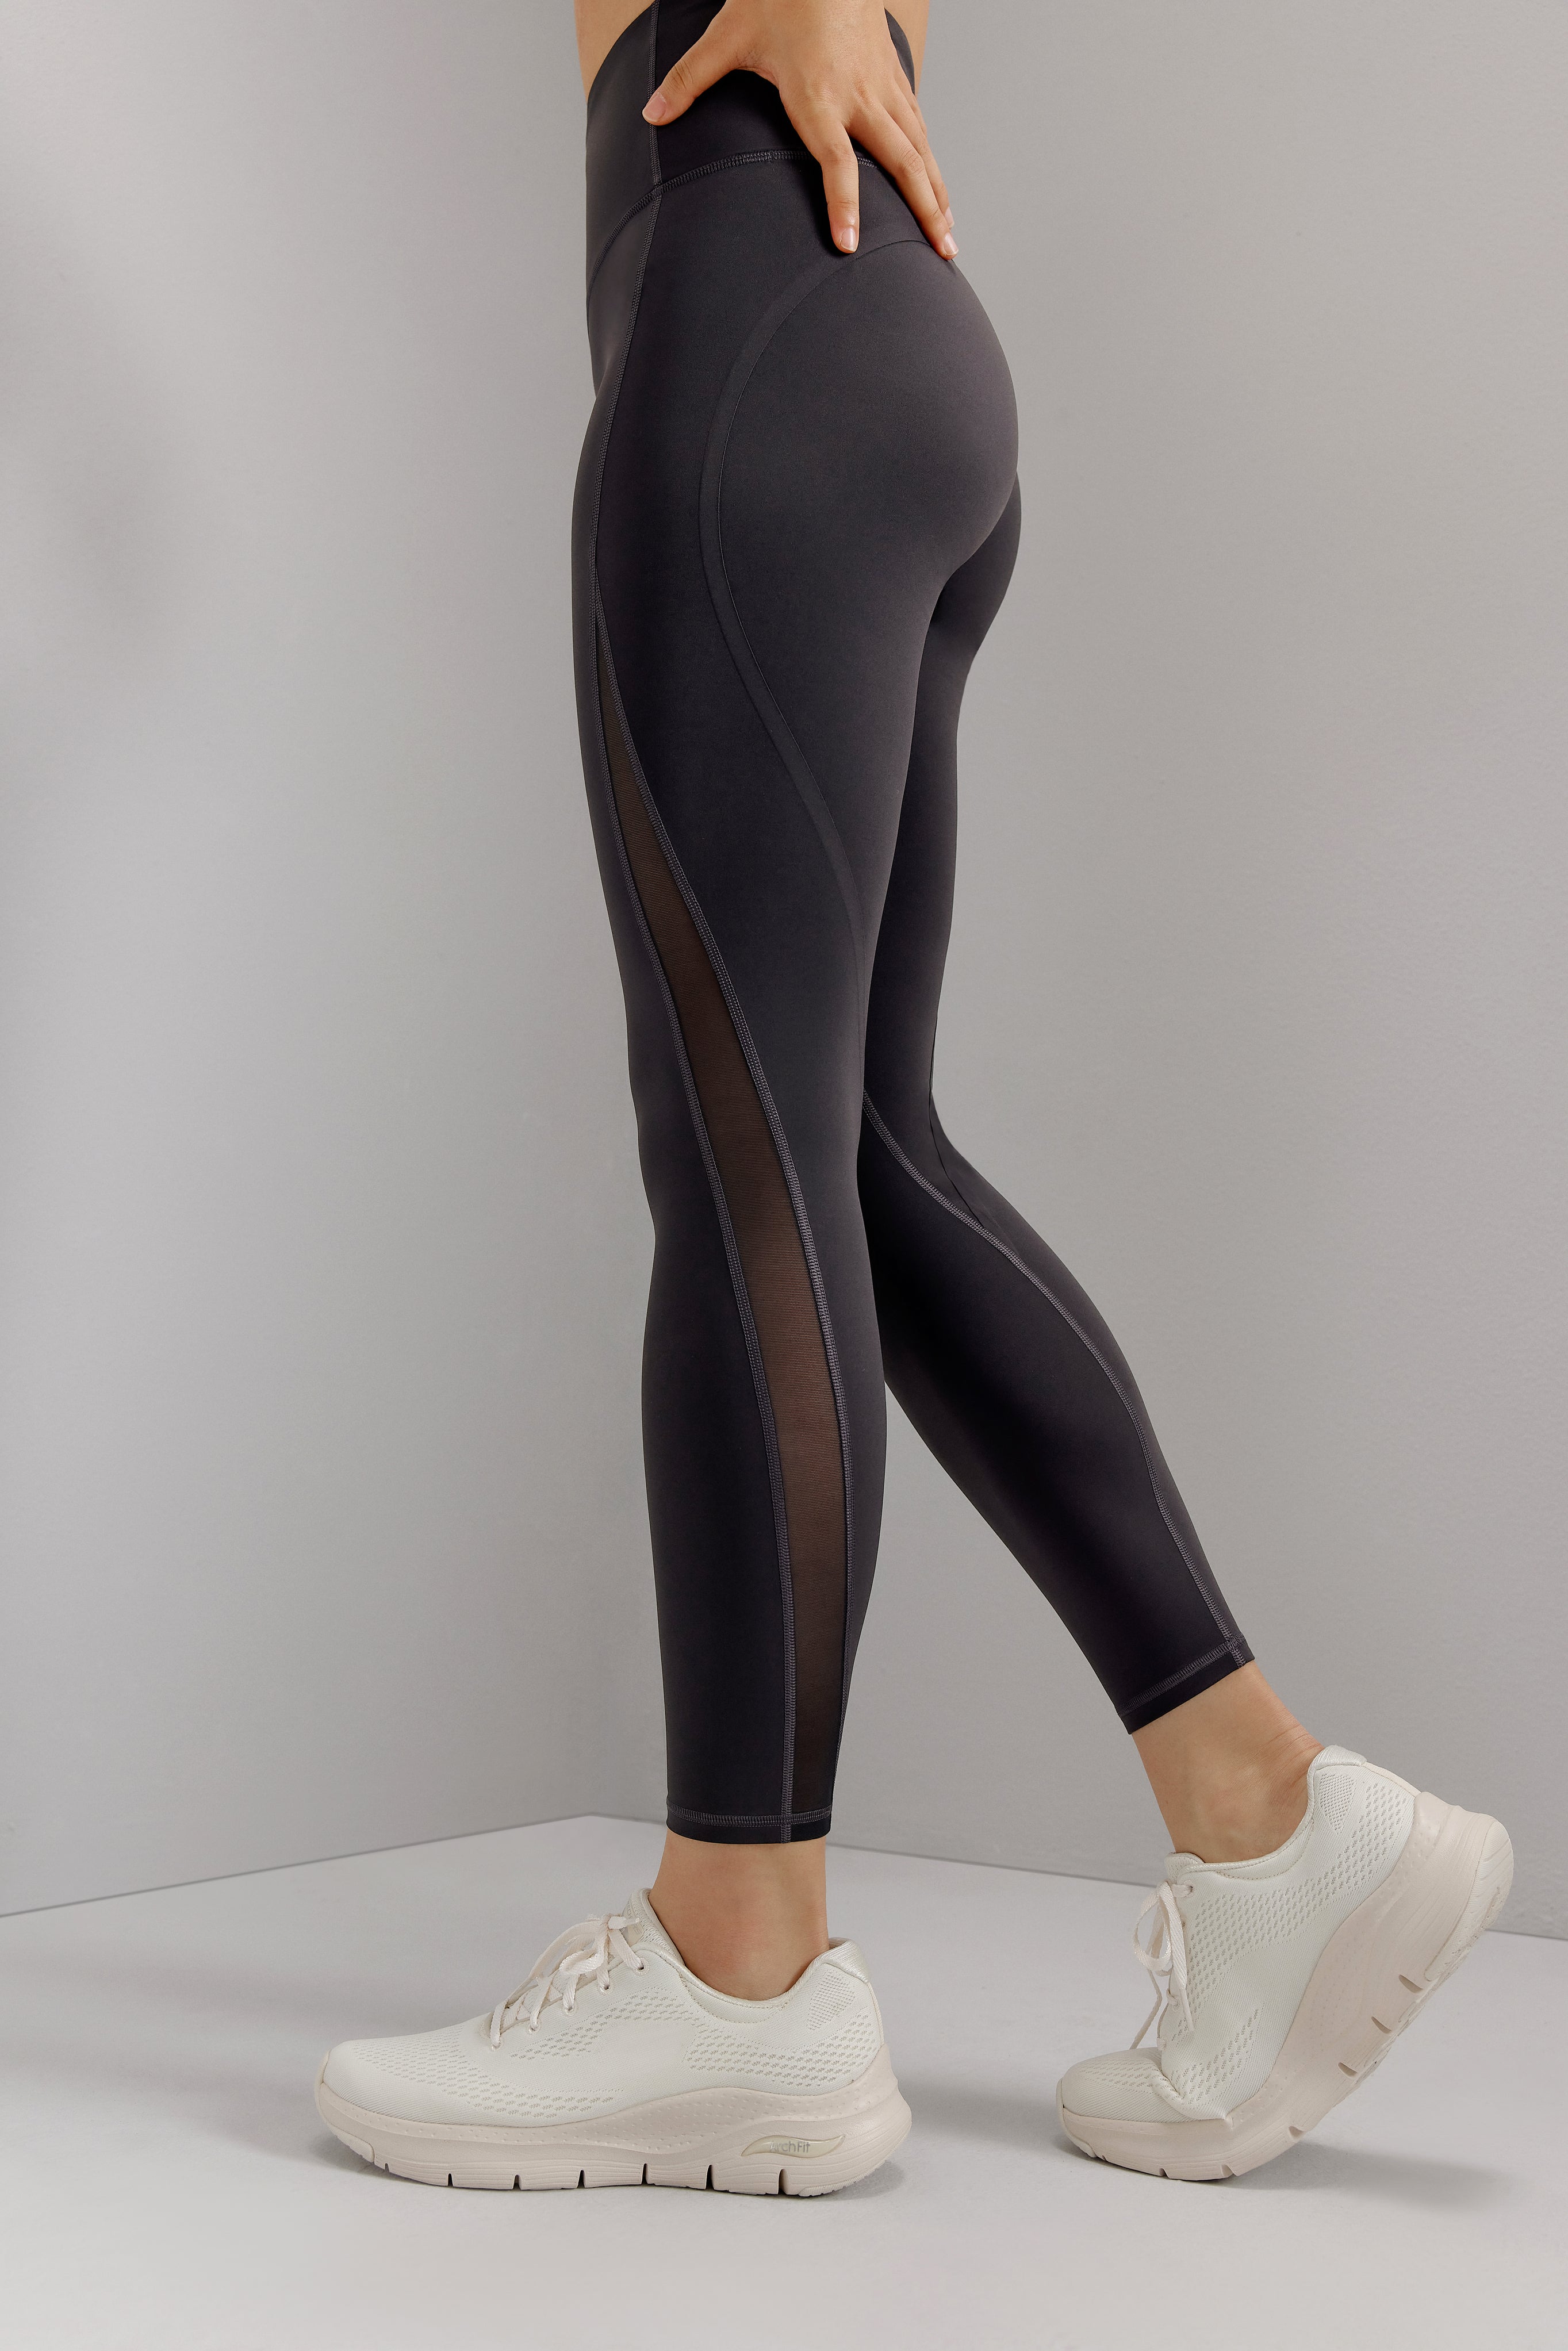 Fit for Life Charcoal Grey High Waisted Leggings